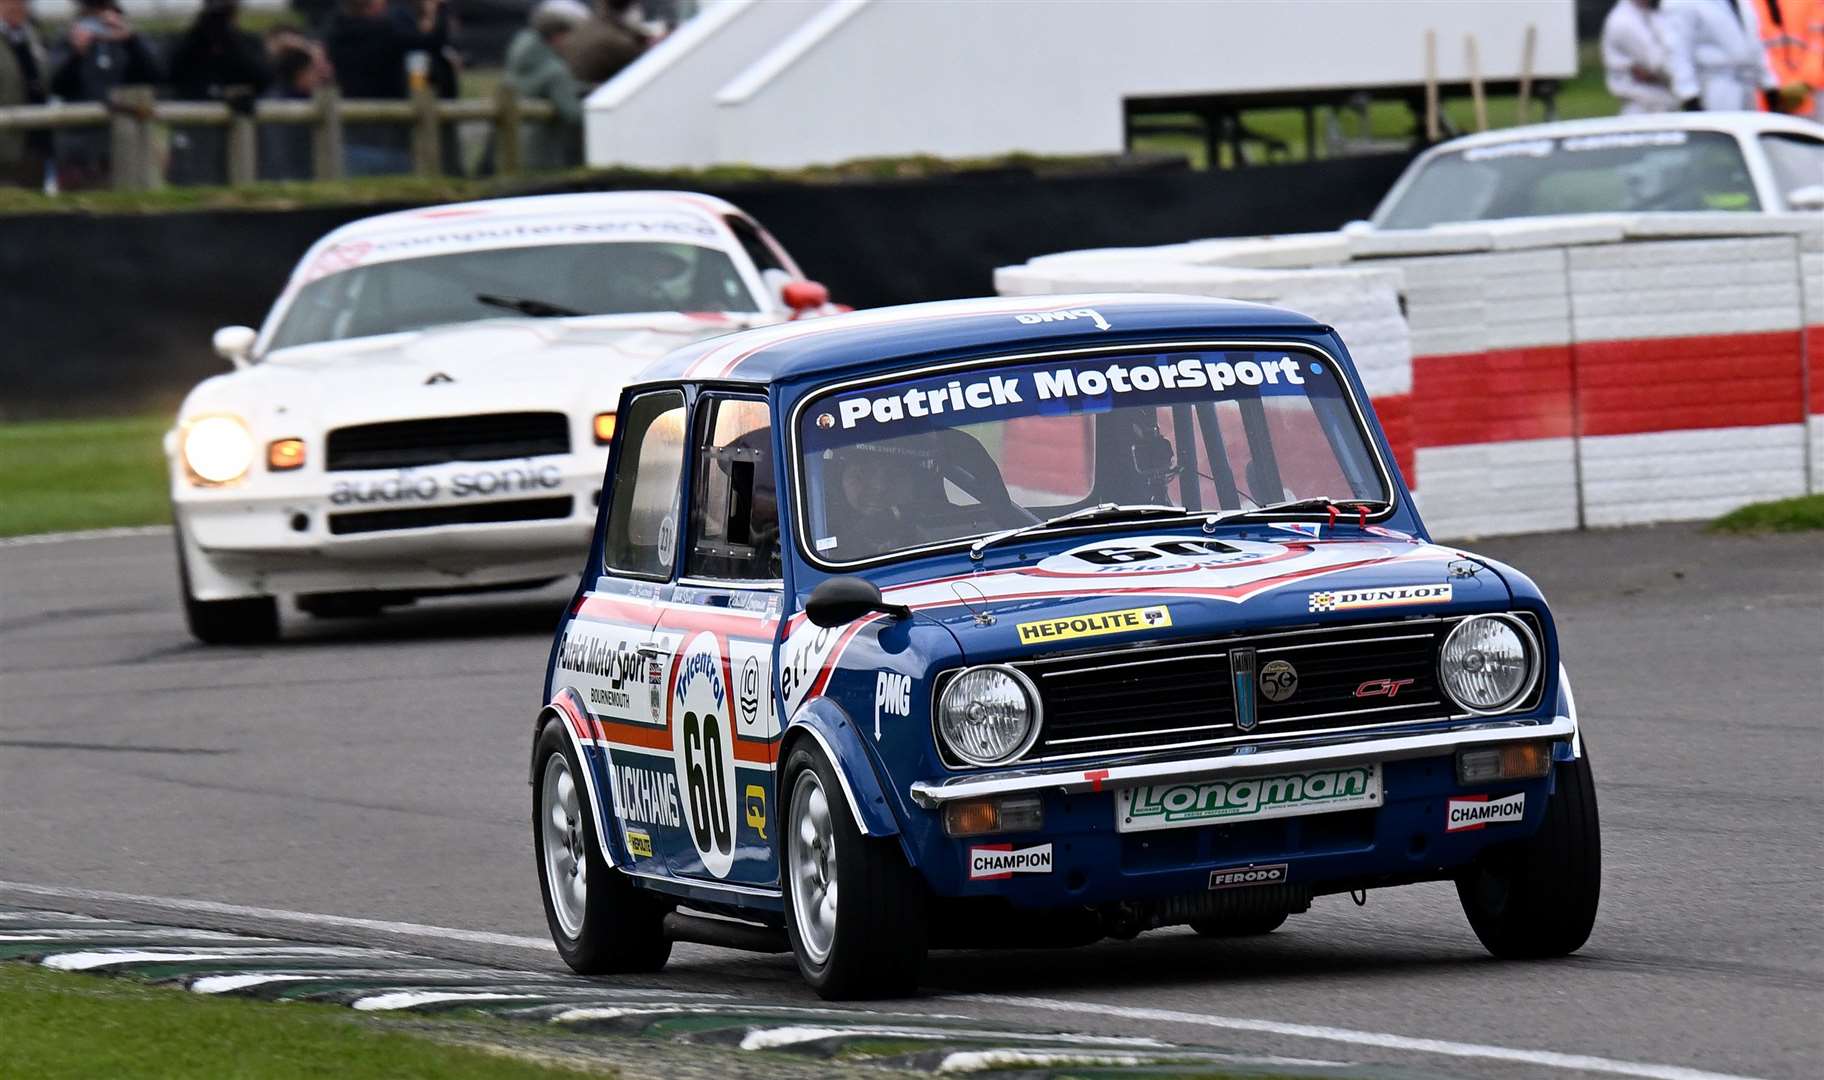 Tenterden's Nick Swift finished the Gordon Spice Trophy Race 13th in his 1978 Mini 1275 GT. Picture: Simon Hildrew